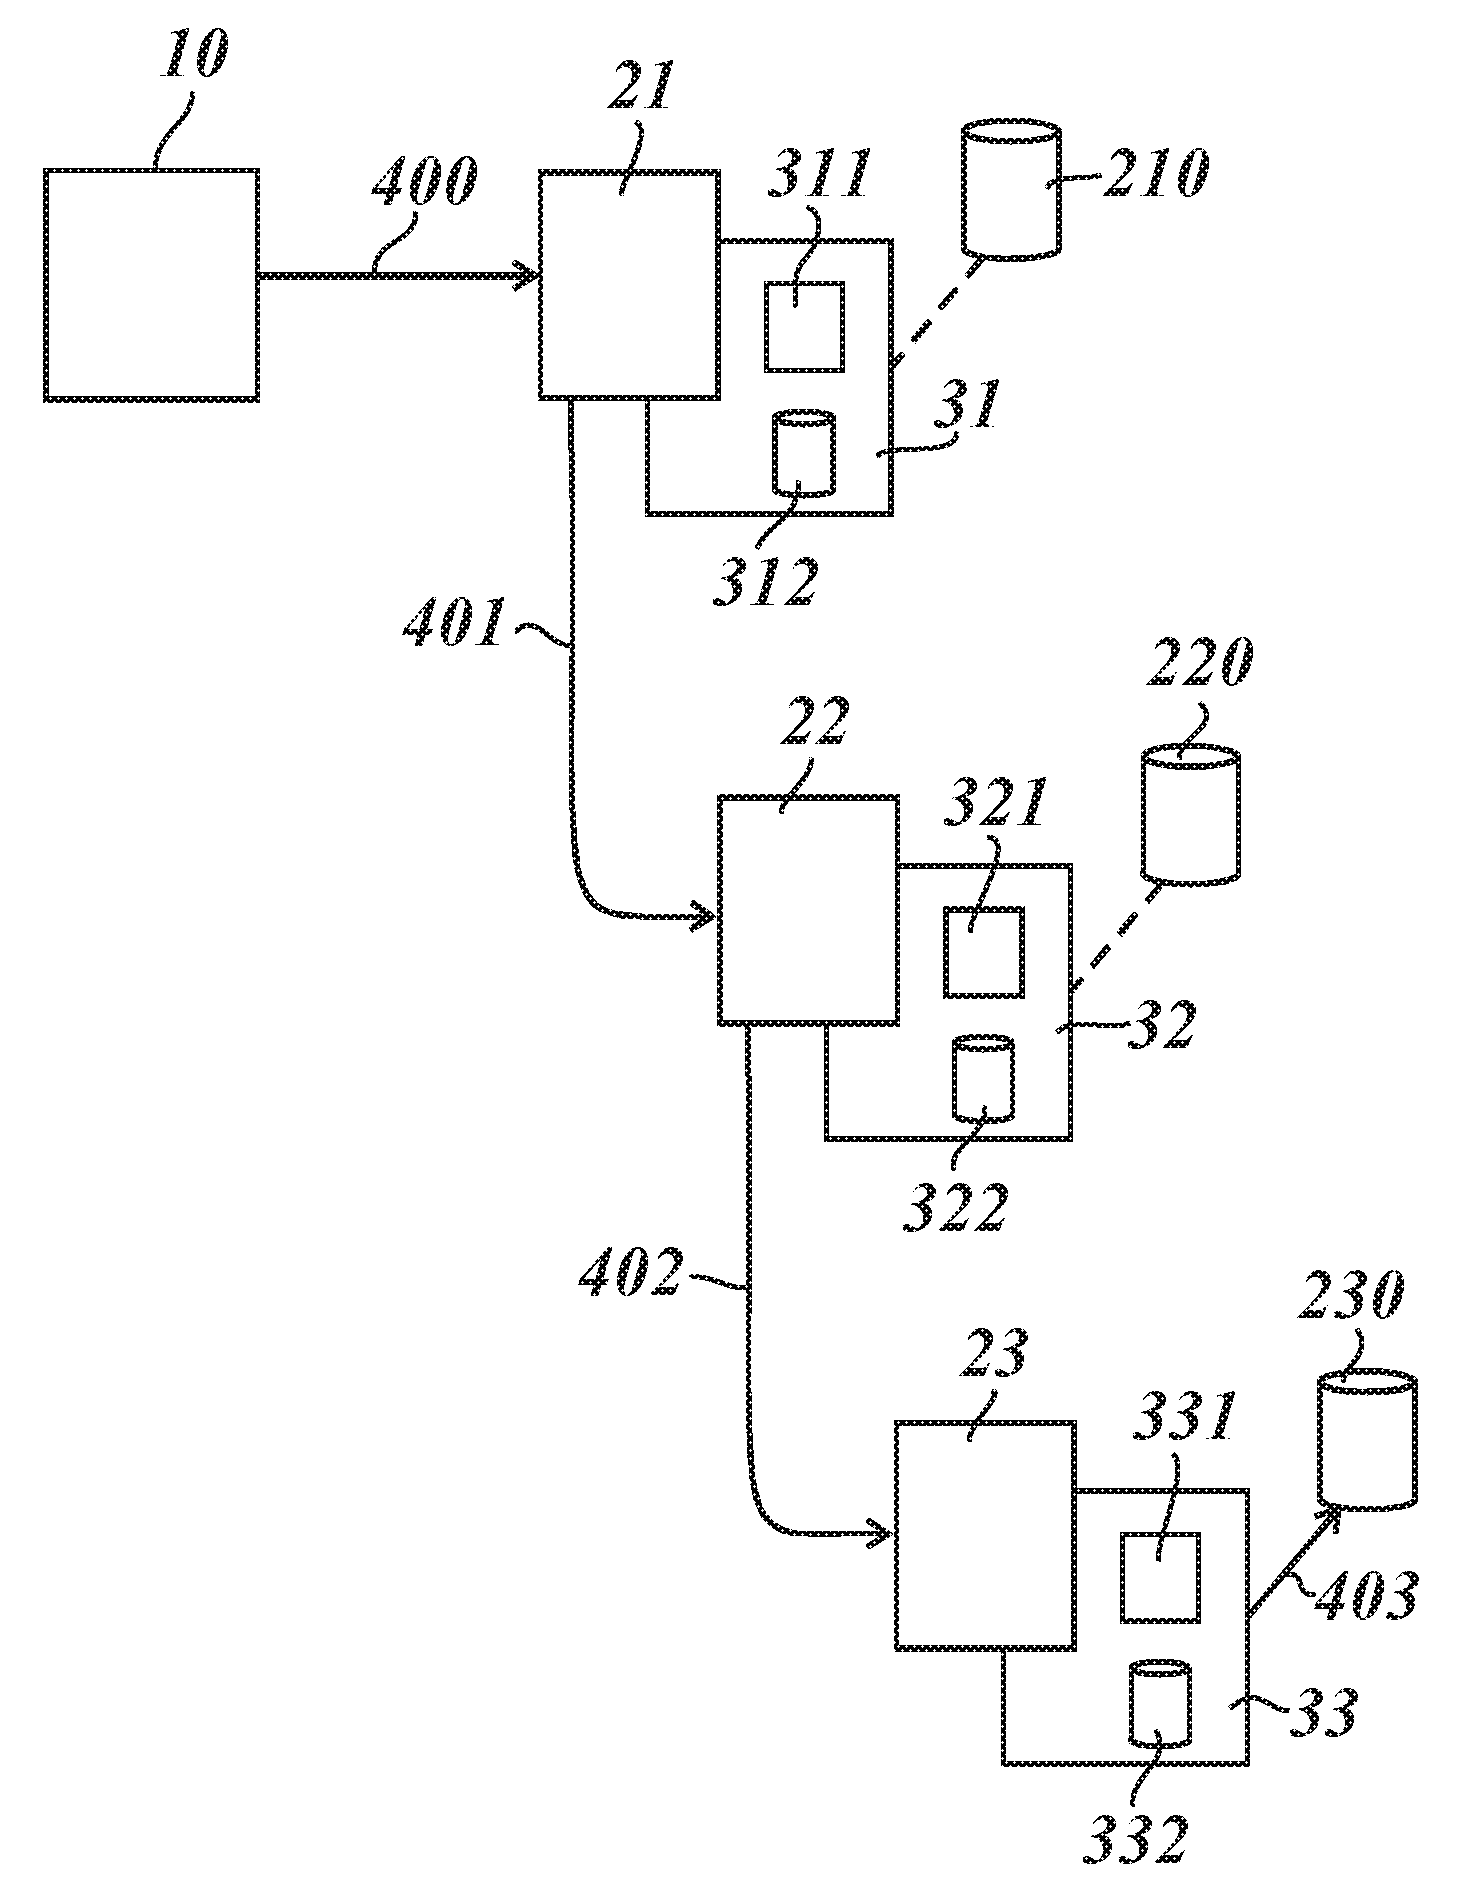 Method of providing an improved call forwarding service